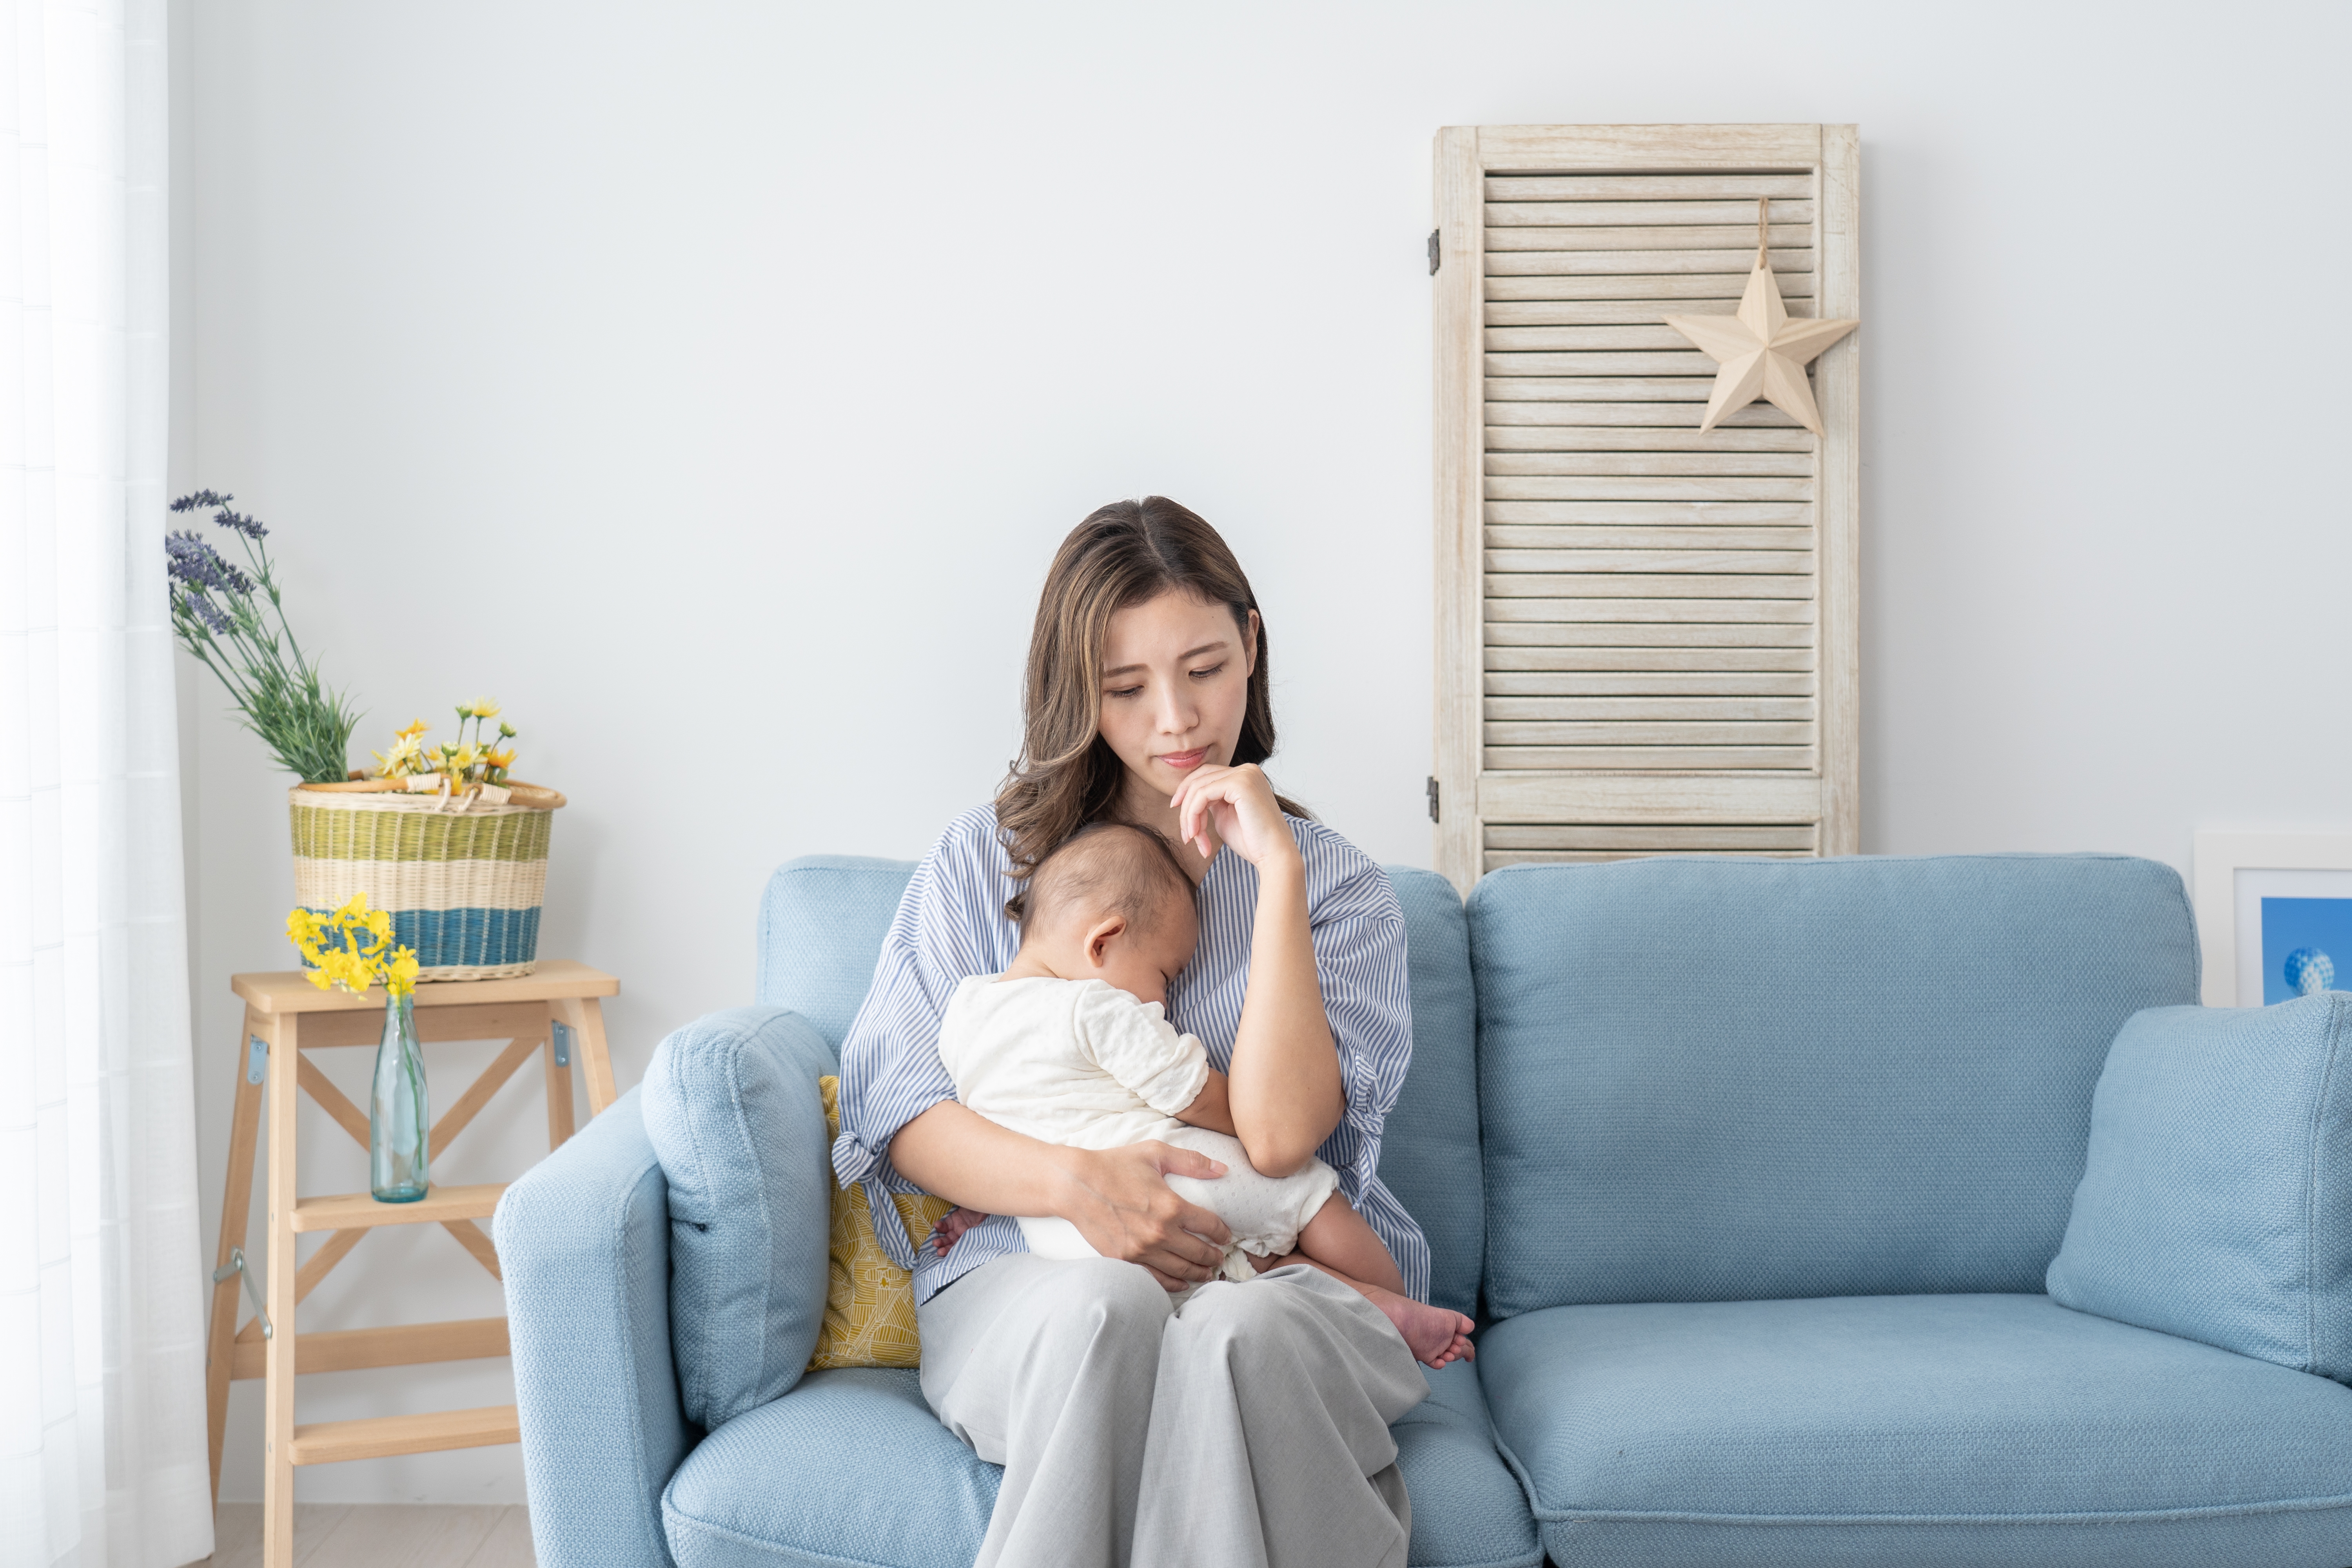 A woman sitting with a baby | Source: Shutterstock